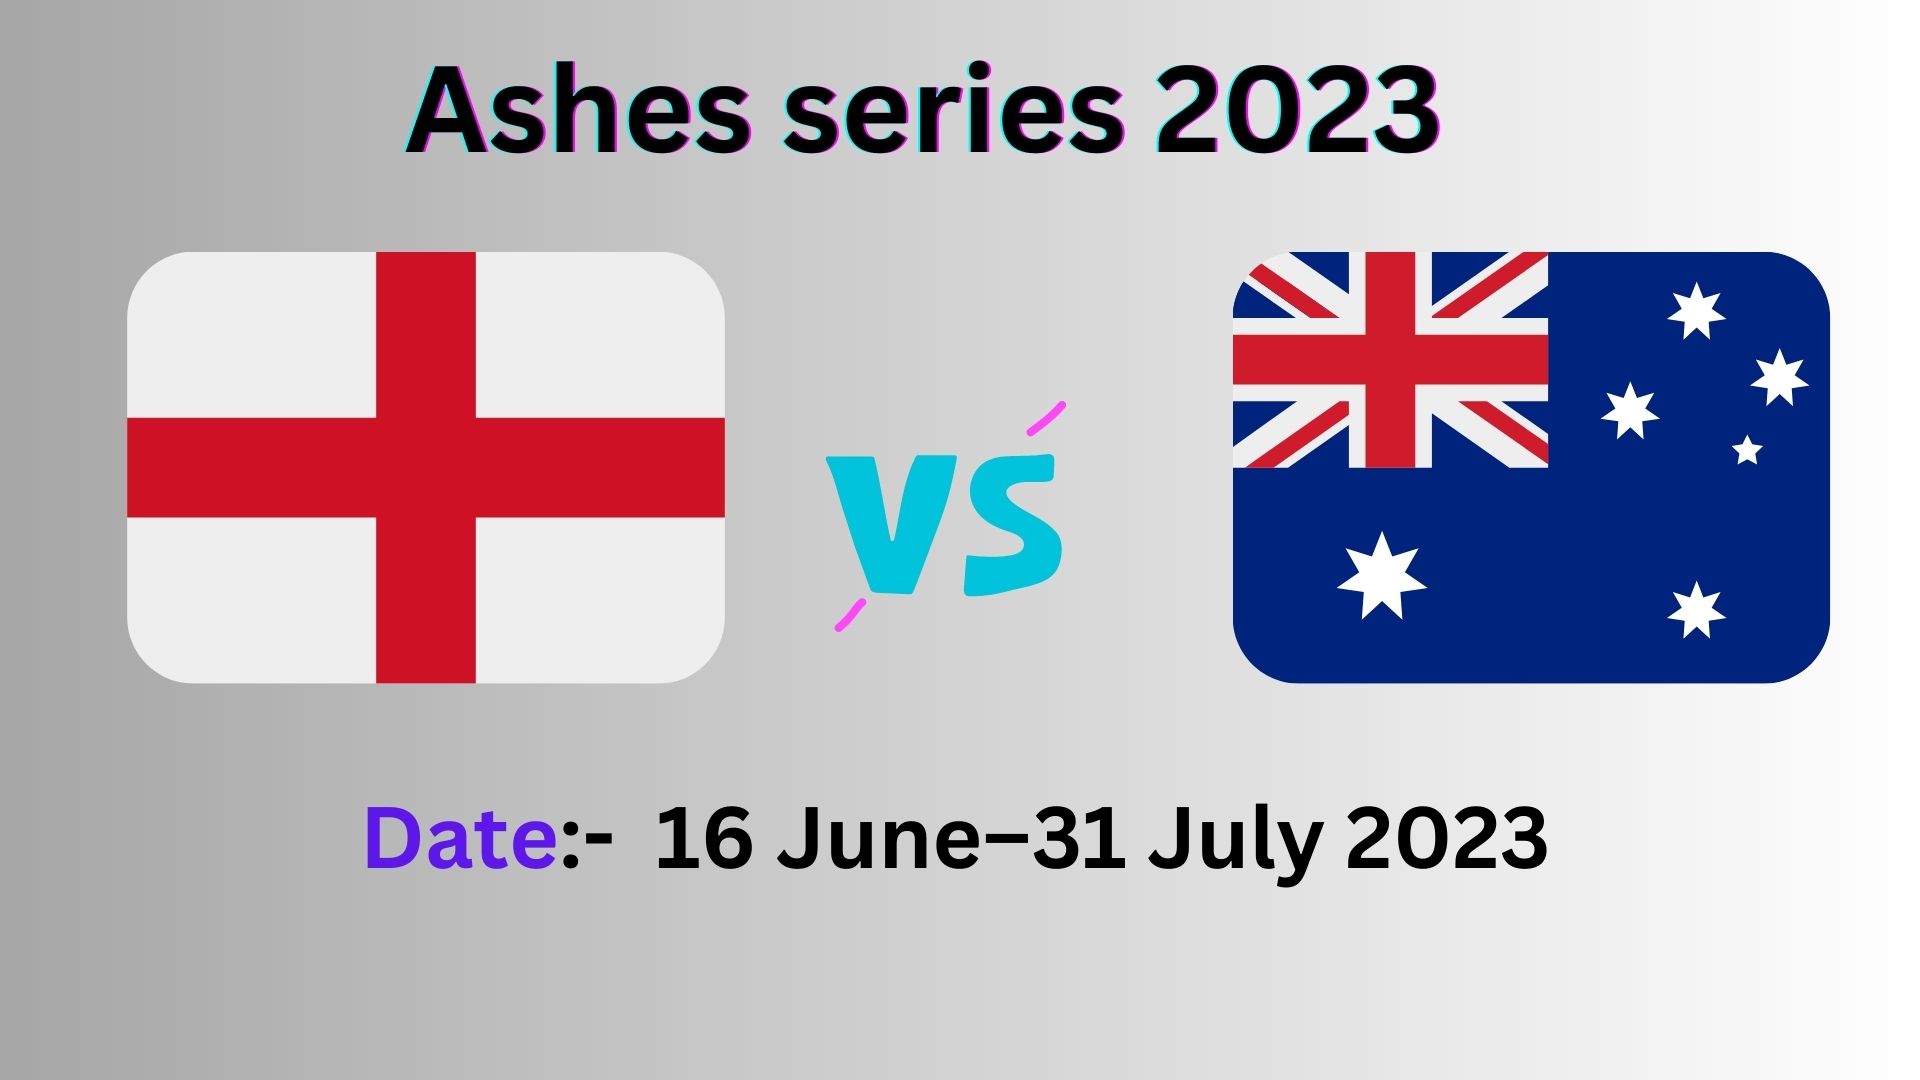 England Vs Australia: Ashes series 2023 Time, Venue, Schedule and Update